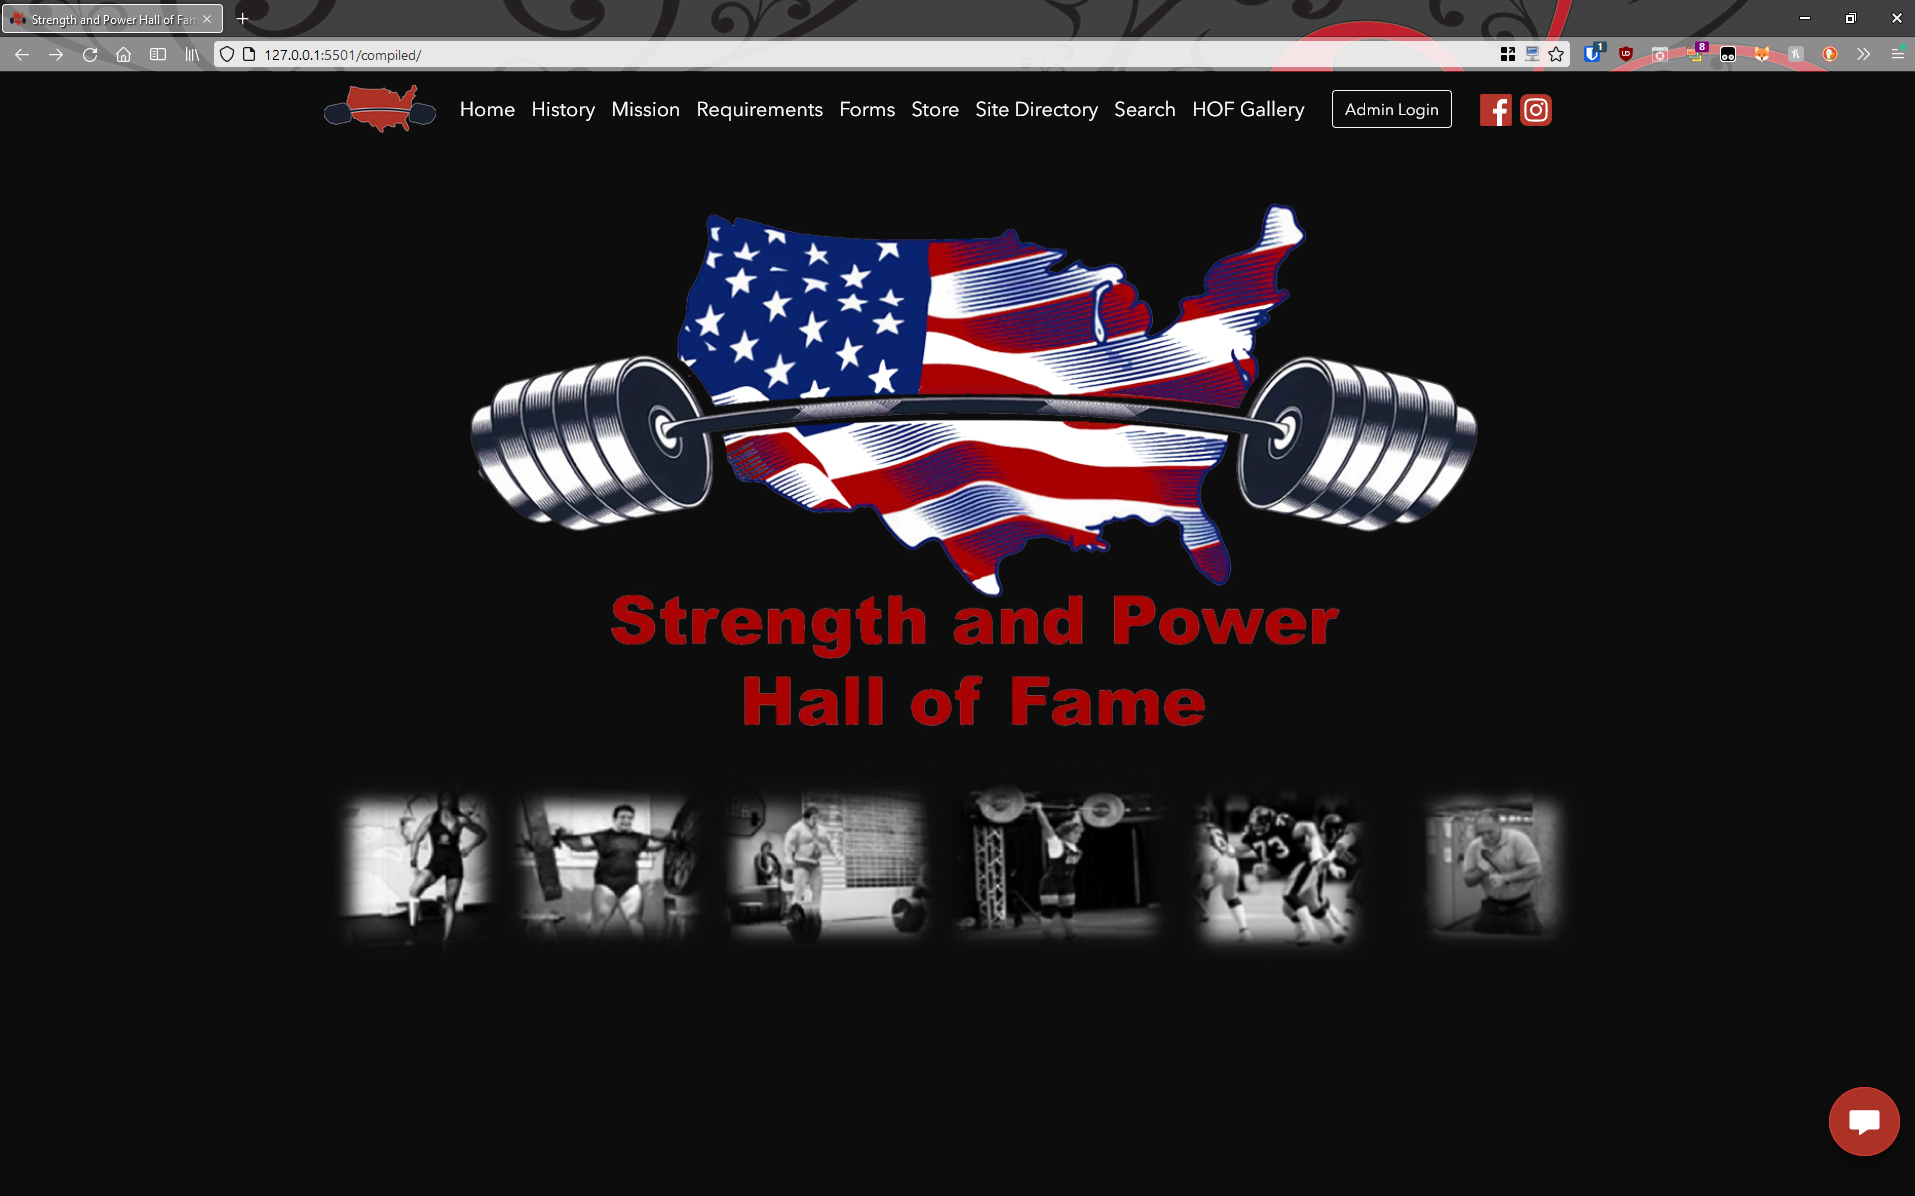 Strengh and Power Hall of Fame Screenshot